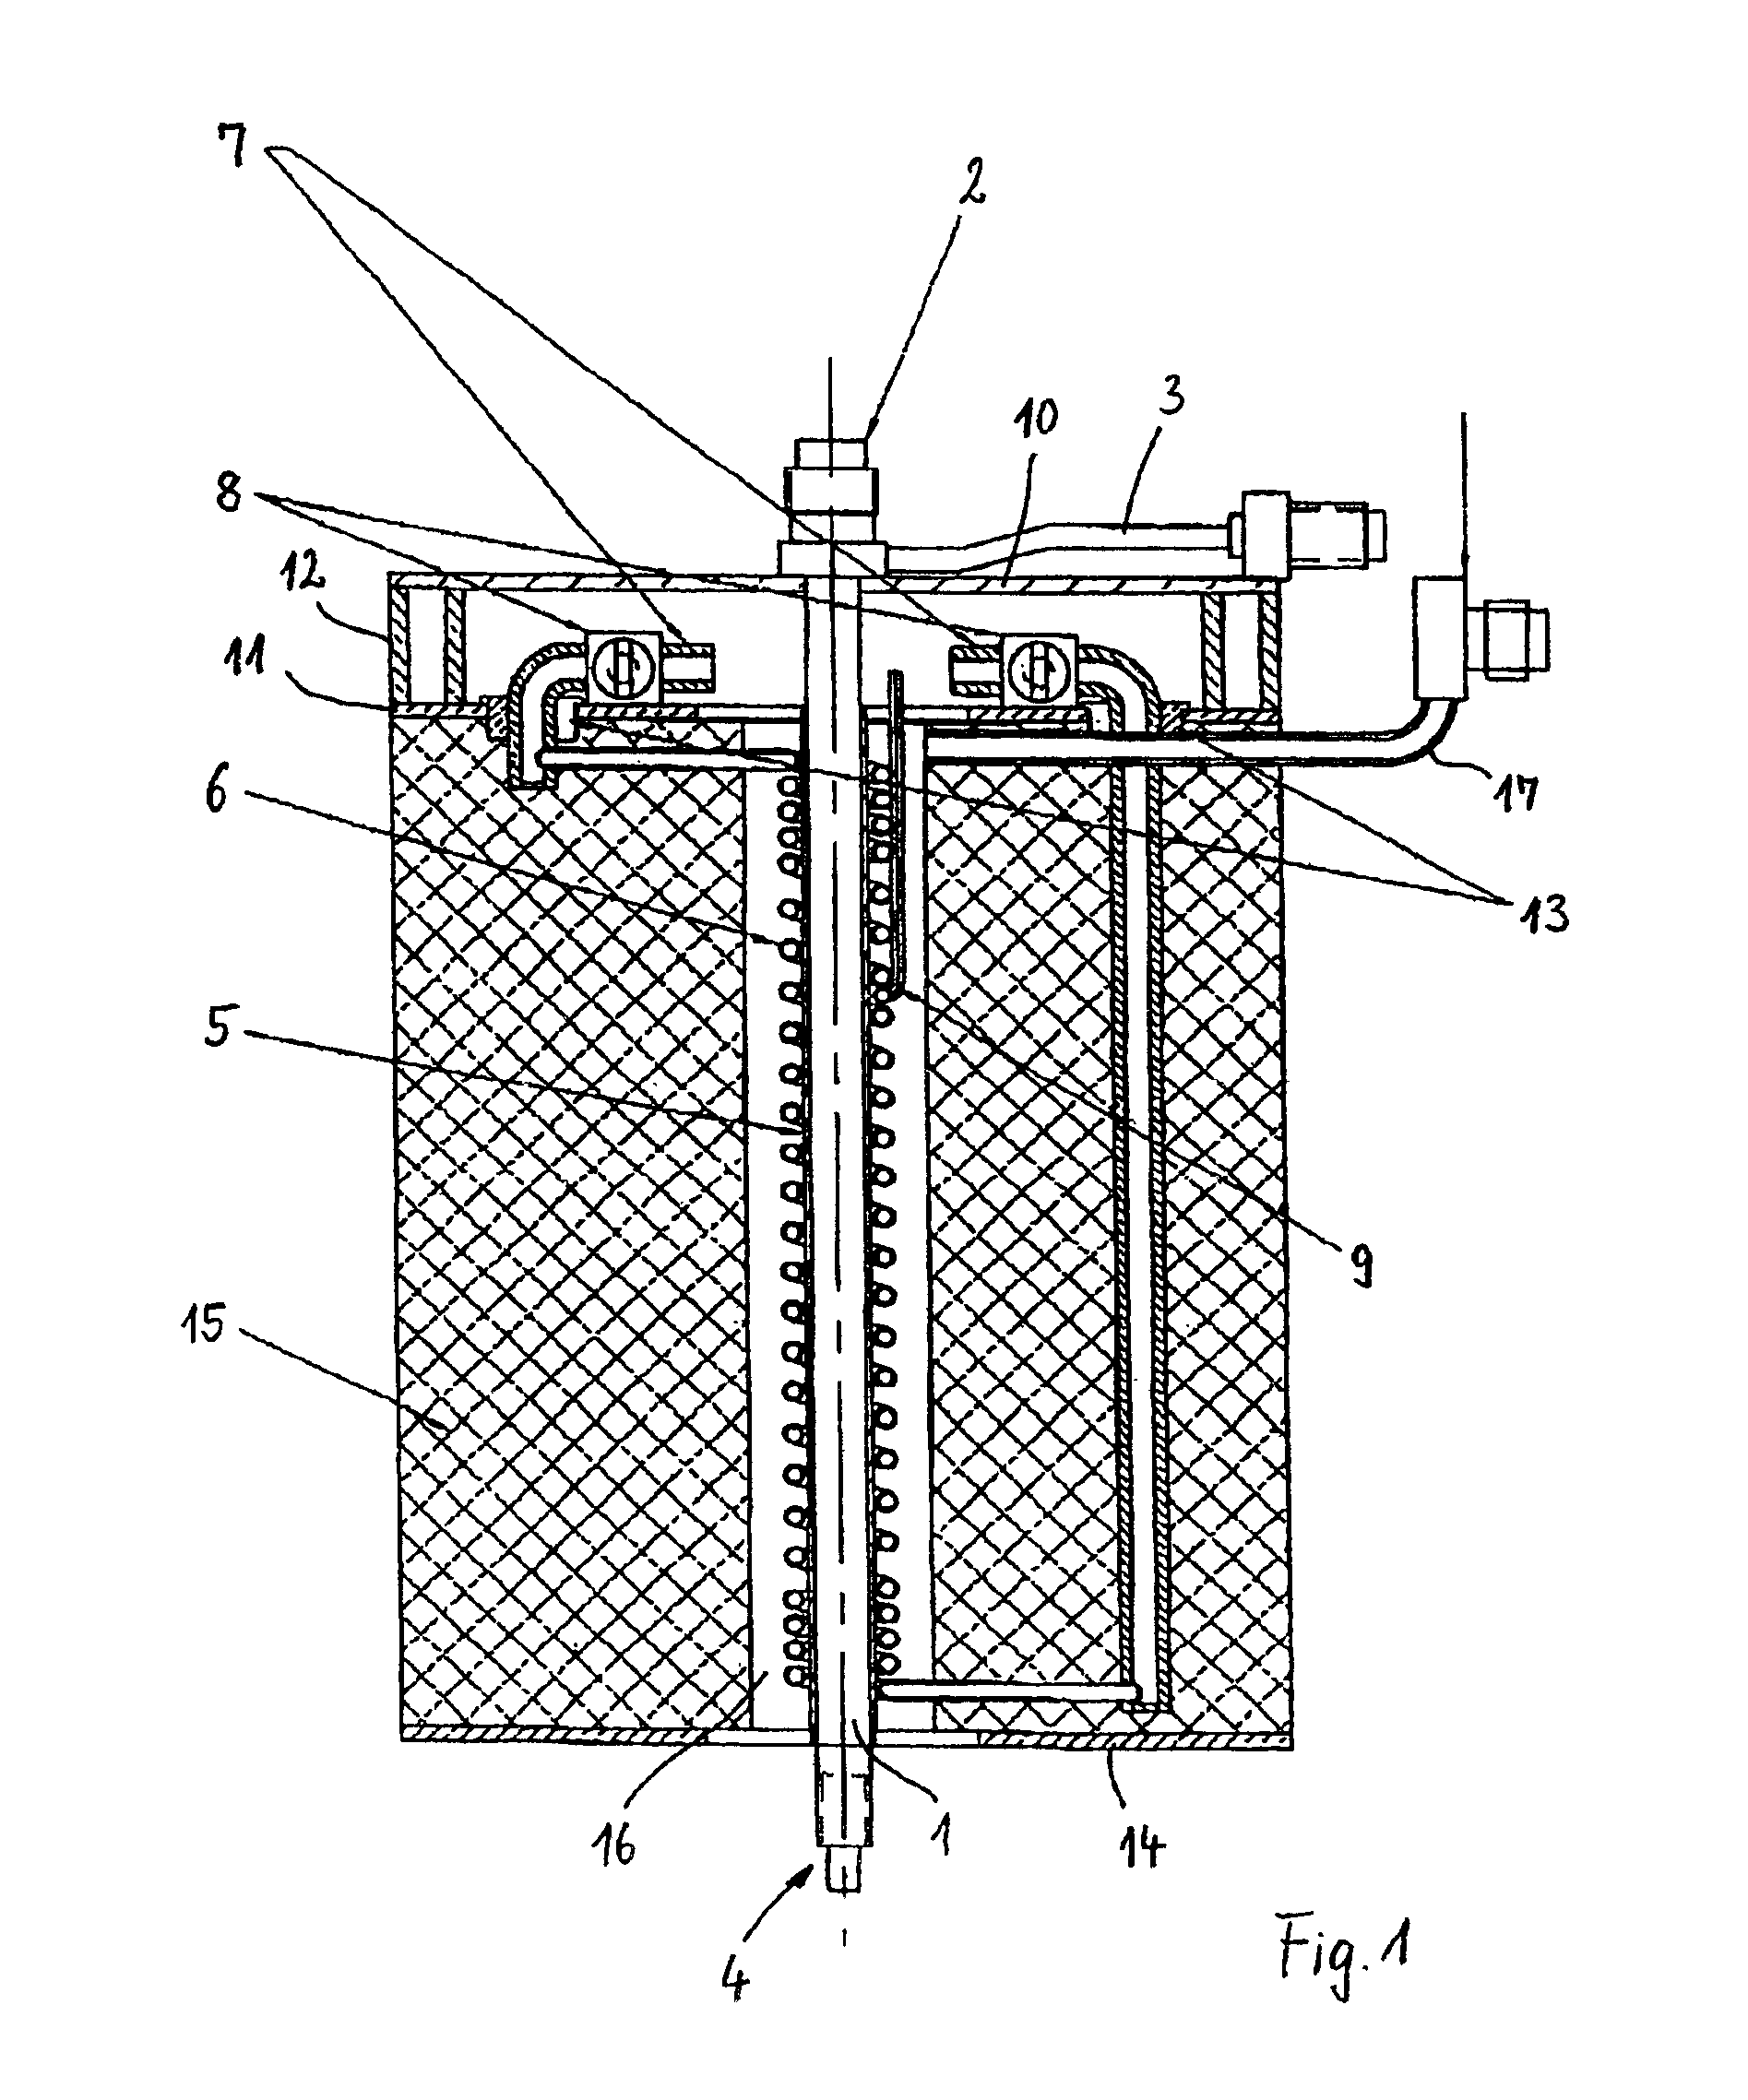 Temperature-controlled injector for a chemical analysis unit